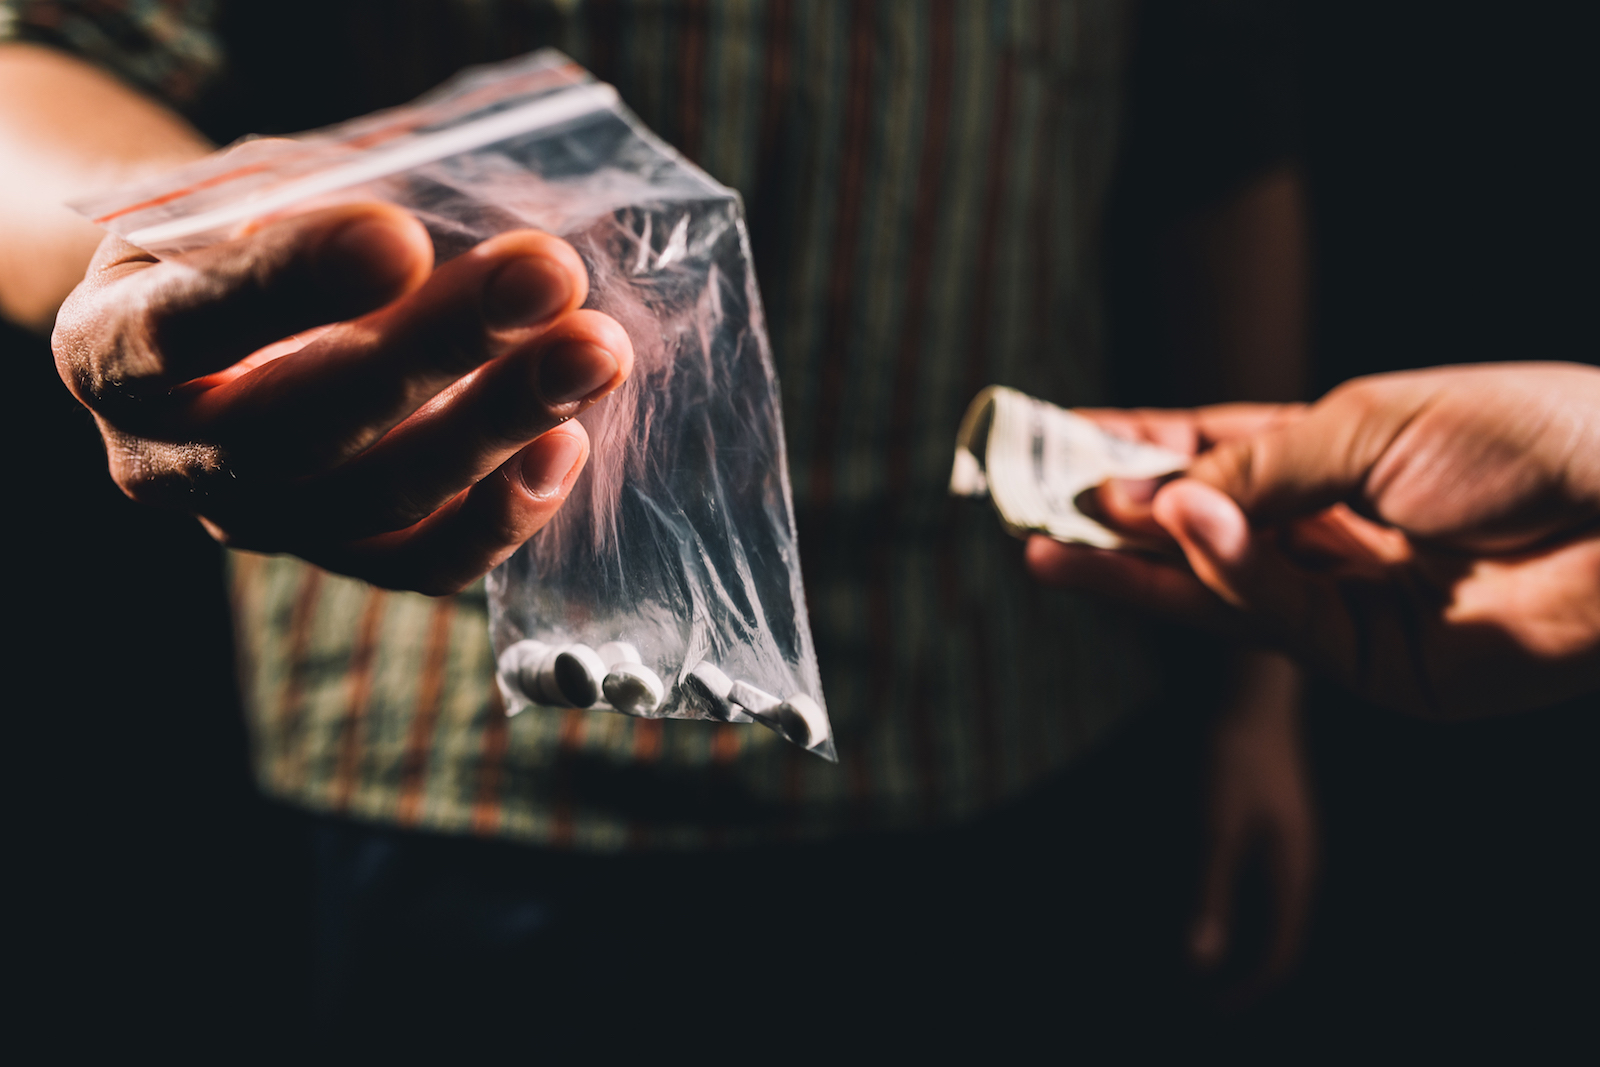 Being A Drug Dealer Isn’t Easy - Here's How Most End Up Getting Caught